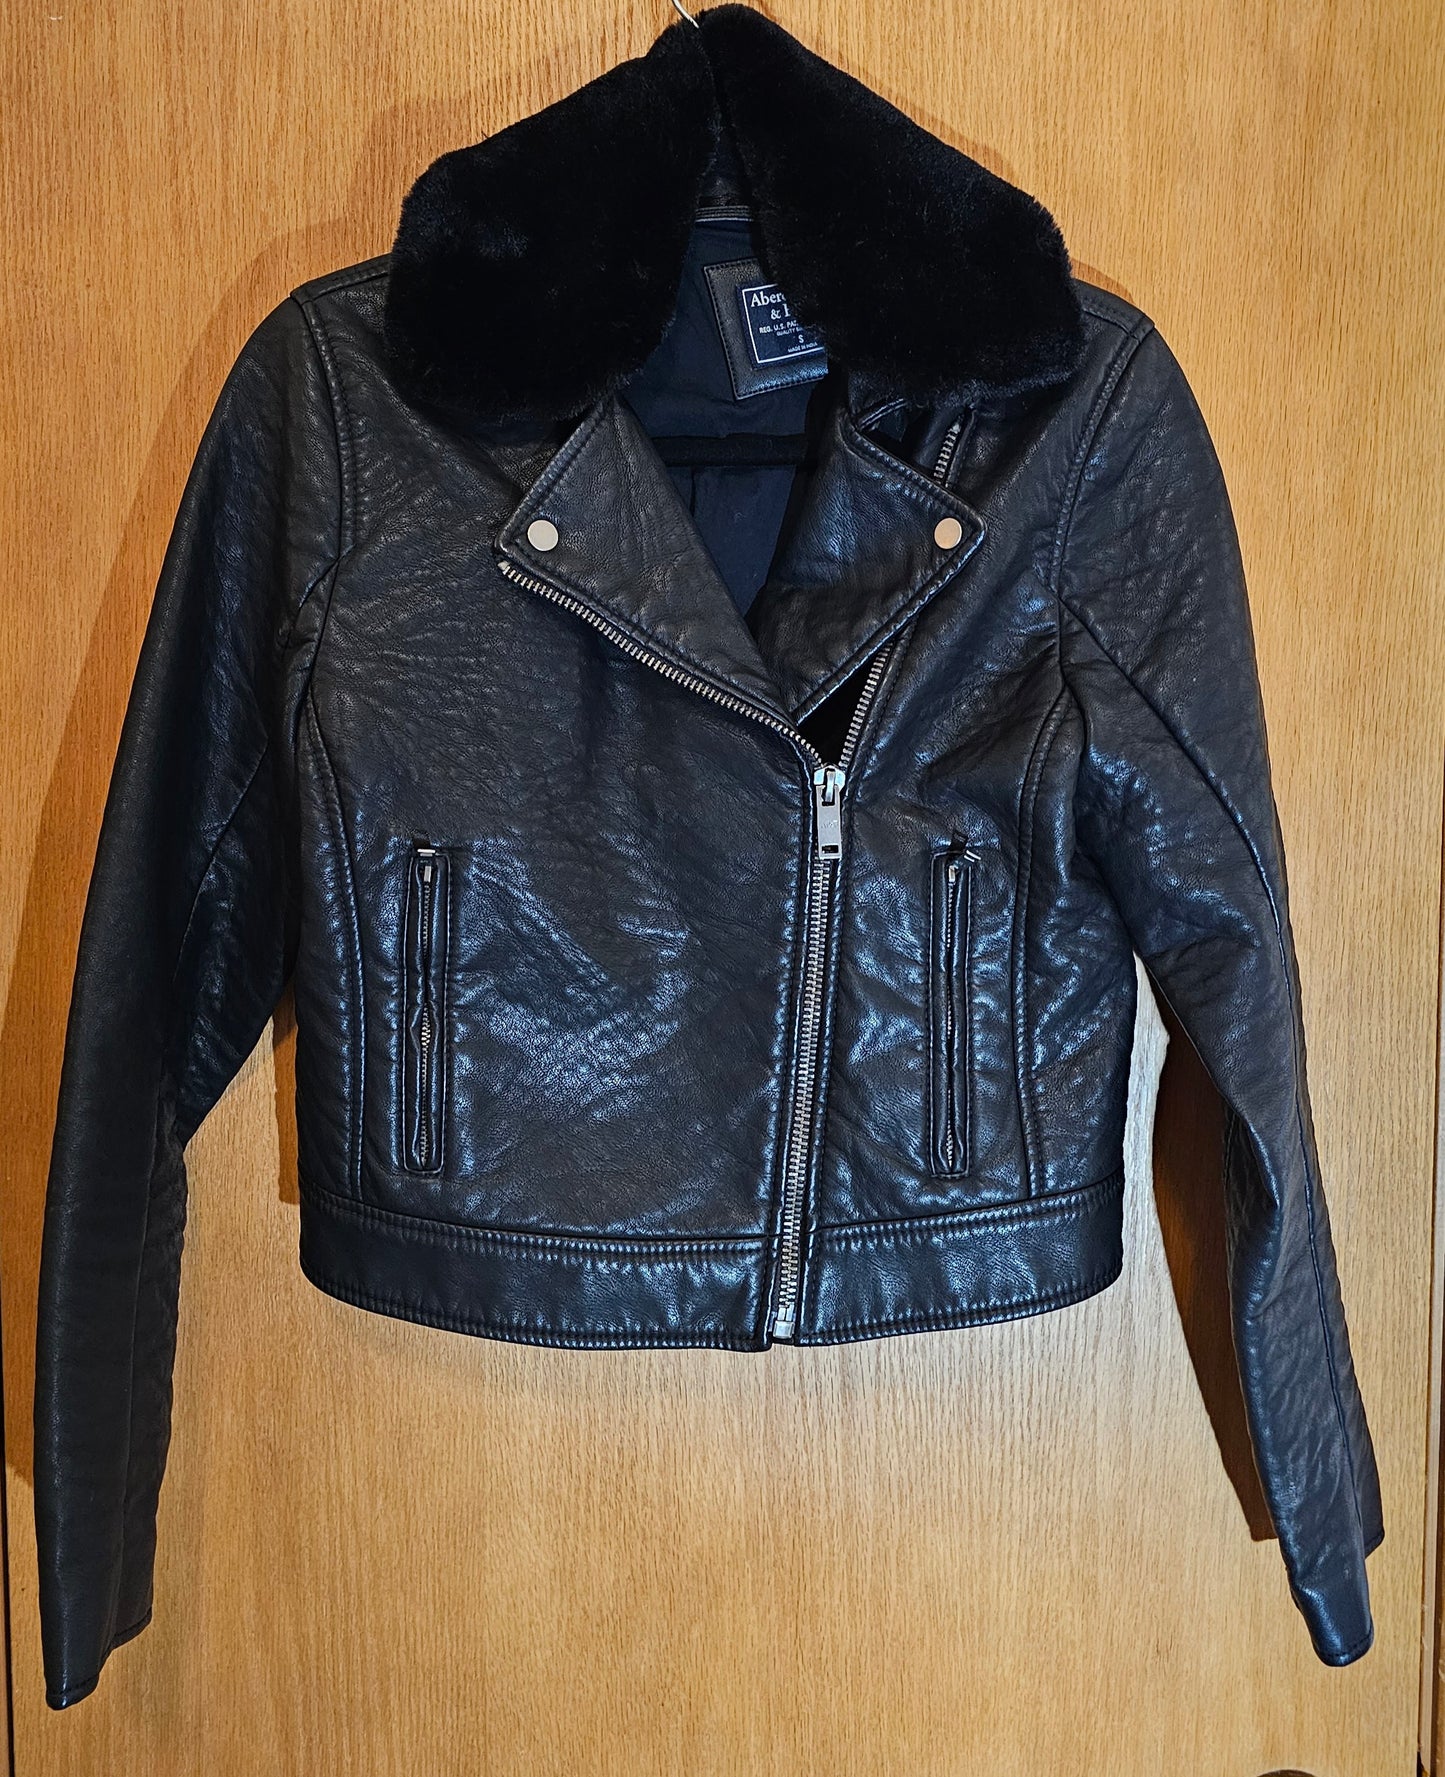 Abercrombie & Fitch Faux Leather Jacket